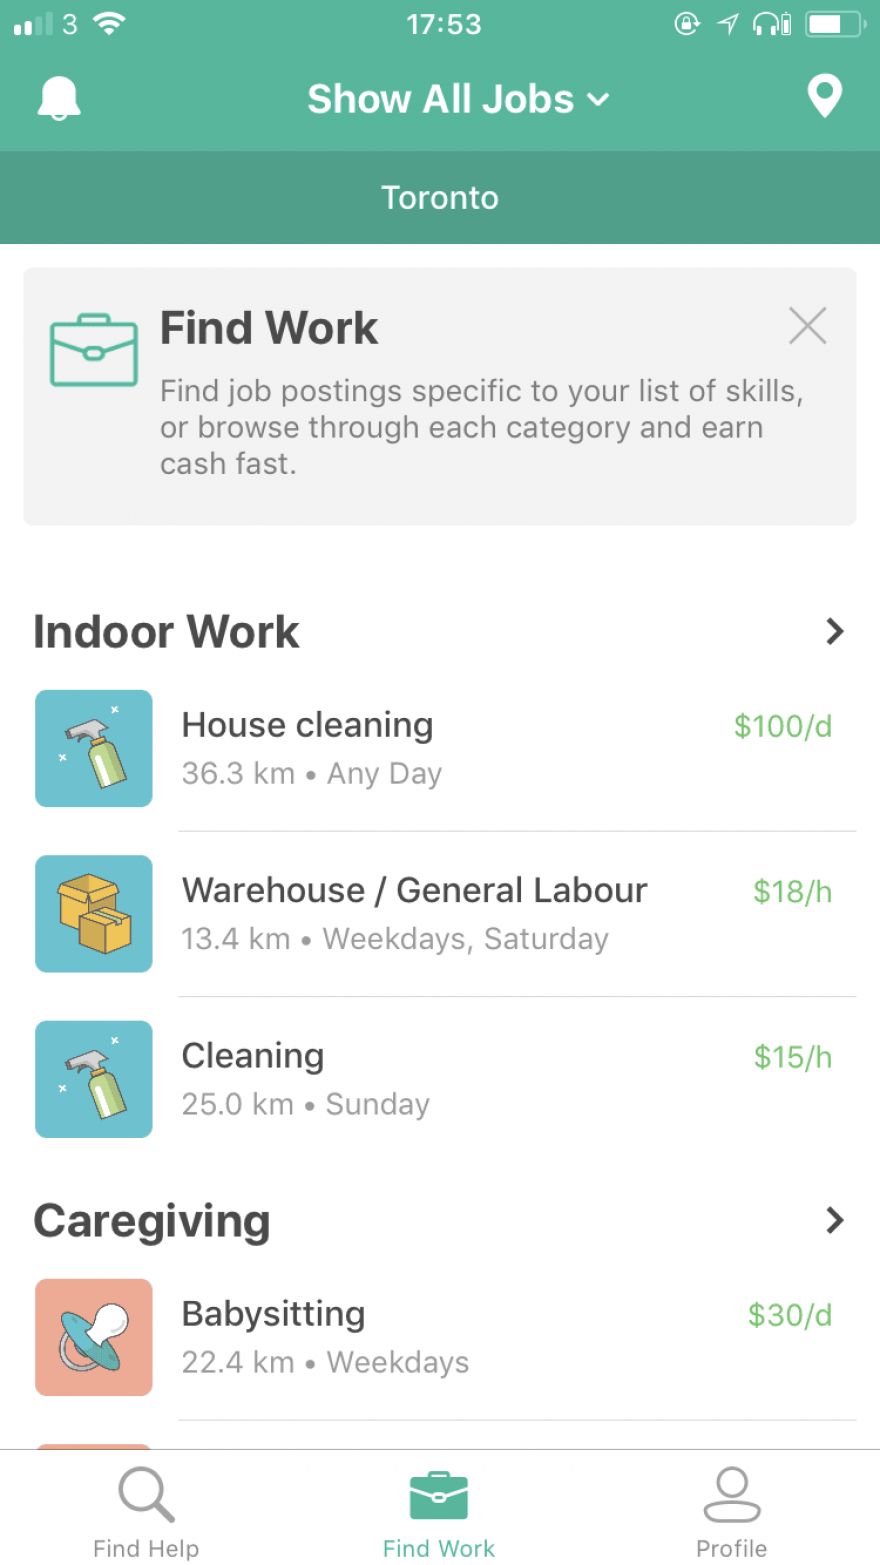 Adam Helps is a kinder, ridiculously Canadian version of TaskRabbit